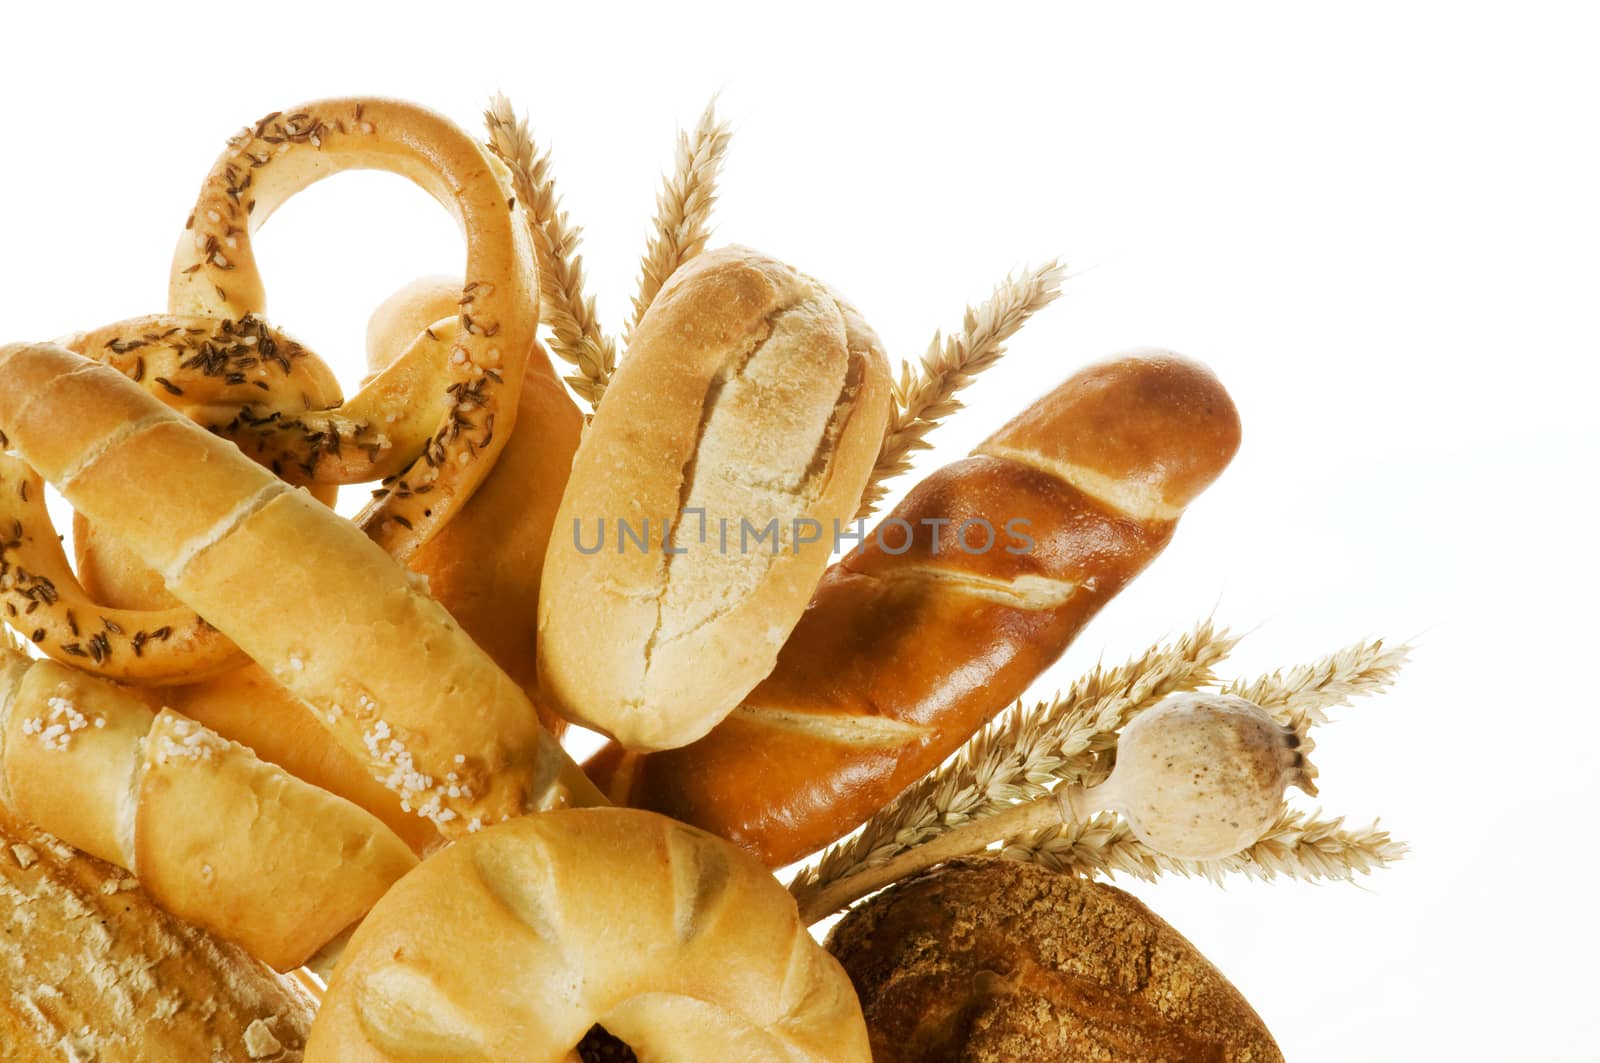 Variety of baked products on white background